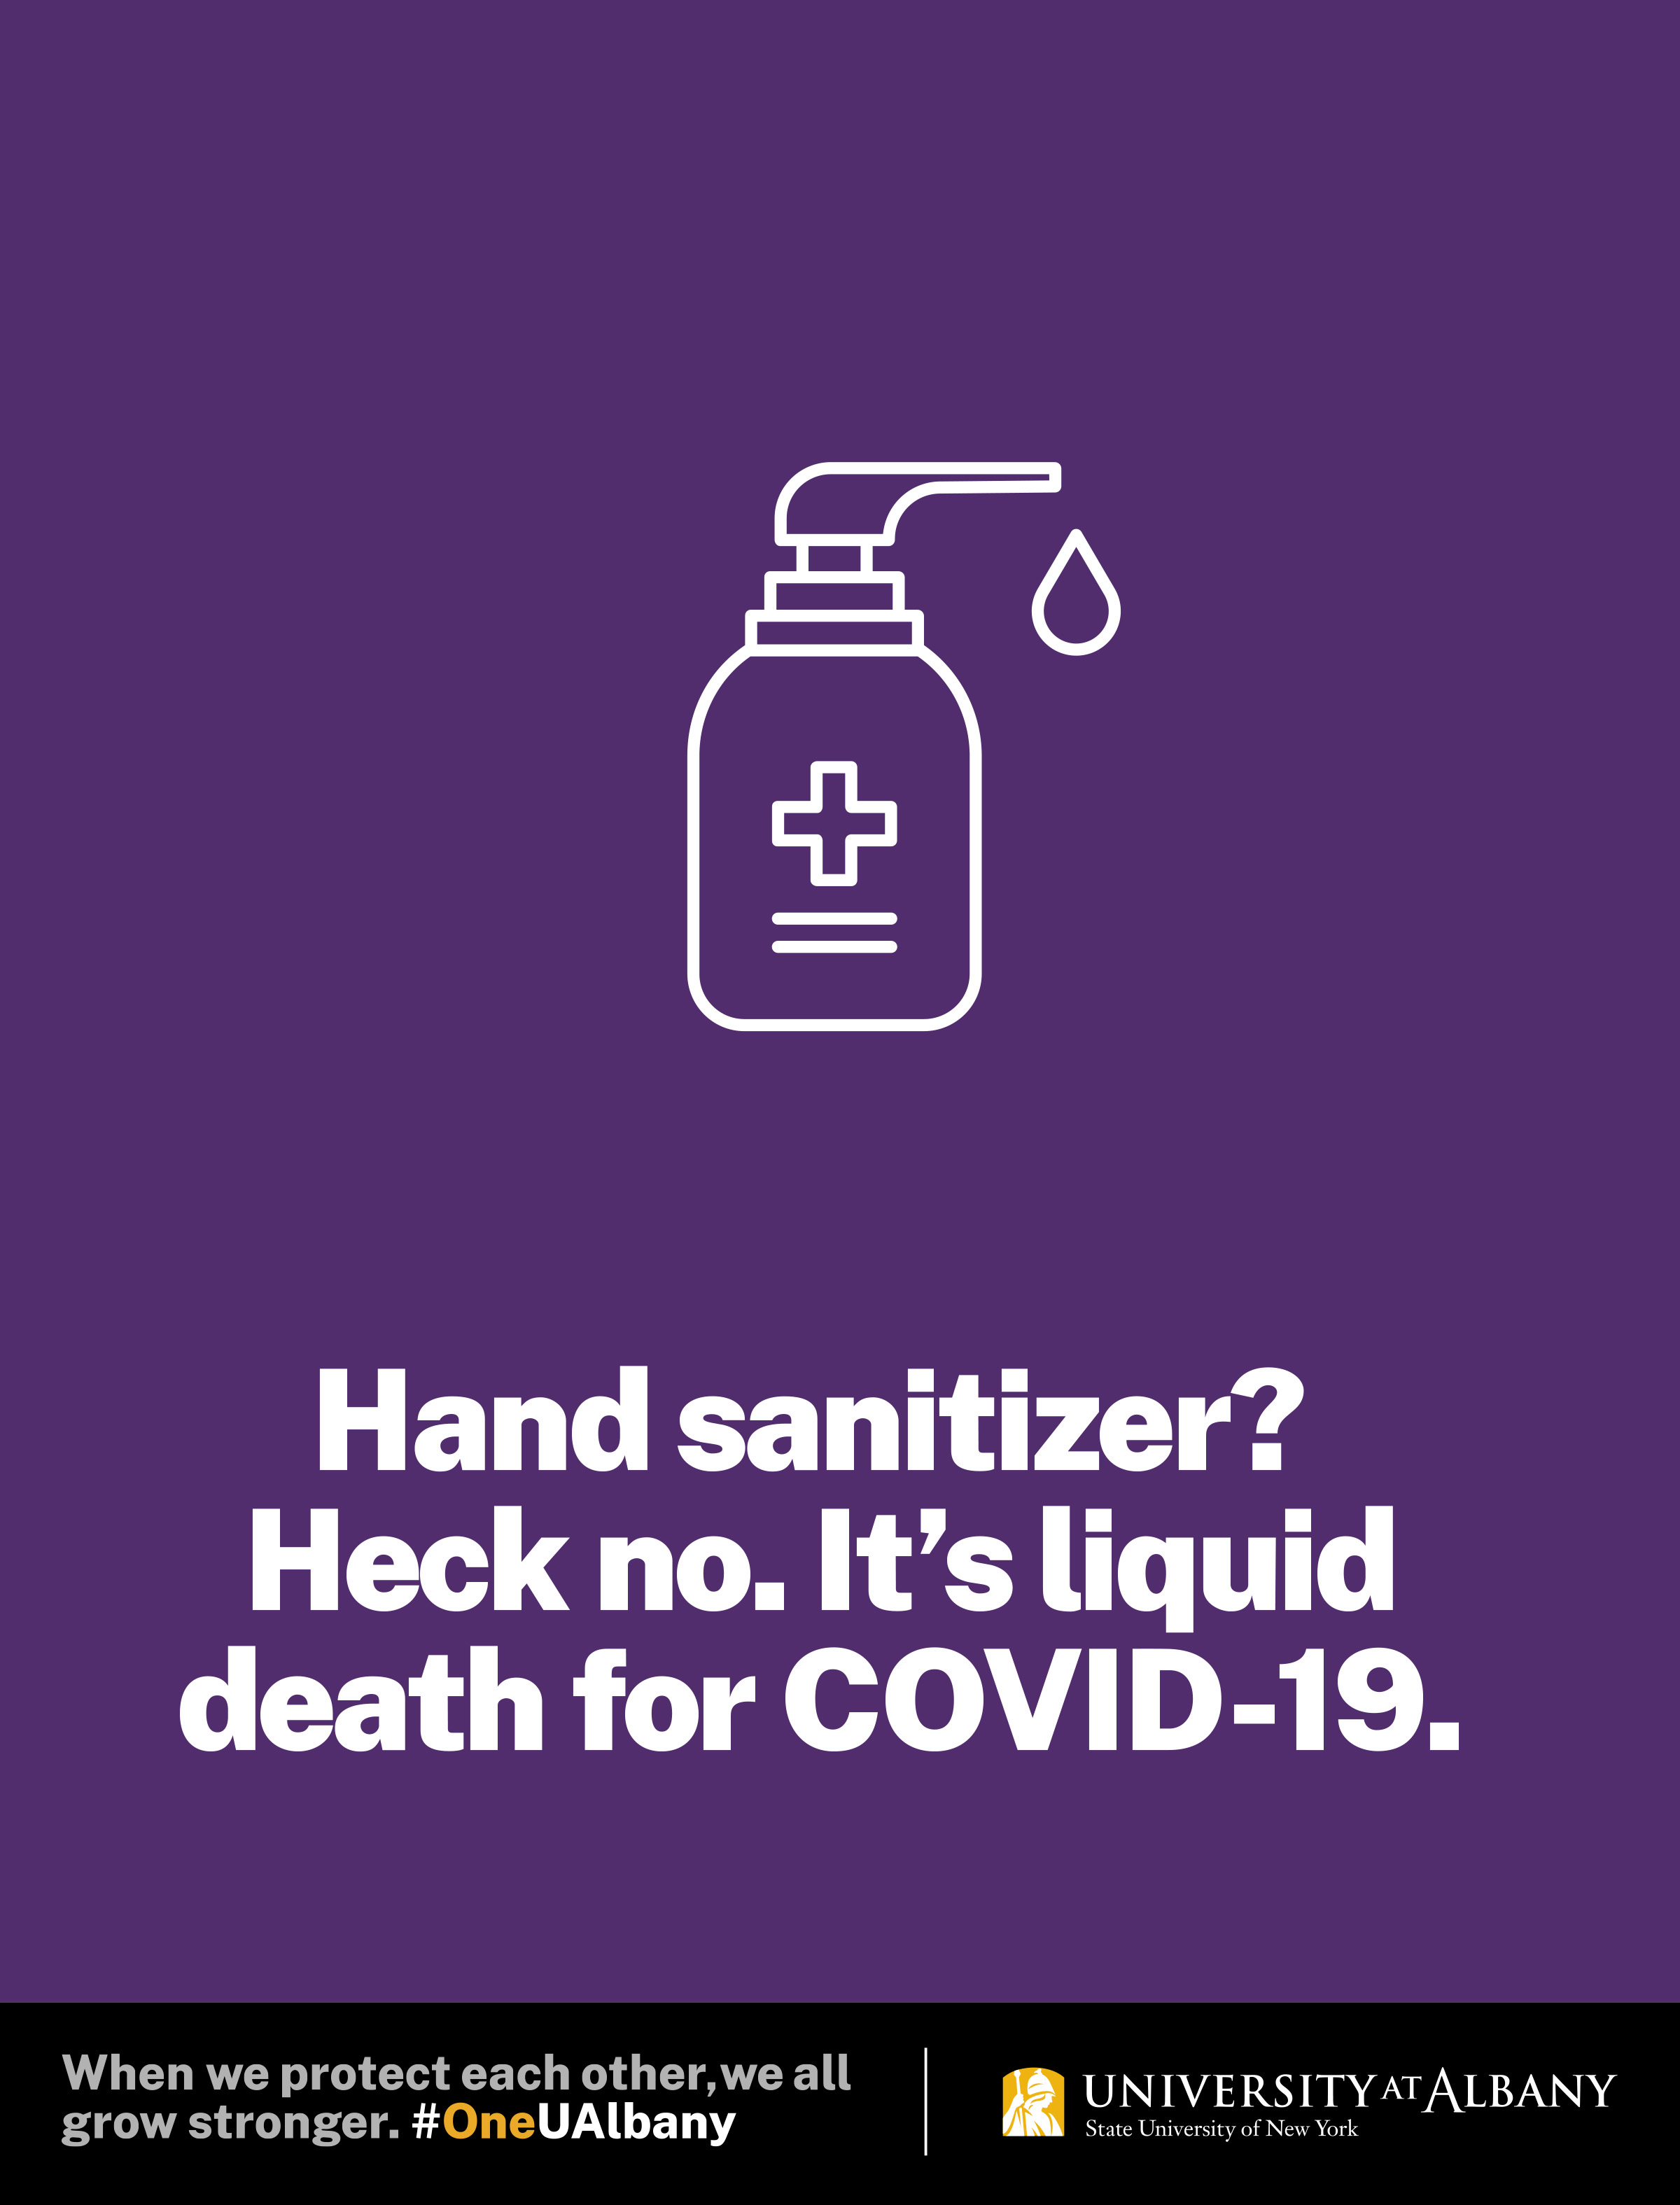 Hand sanitizer? Heck no. It’s liquid death for COVID-19.